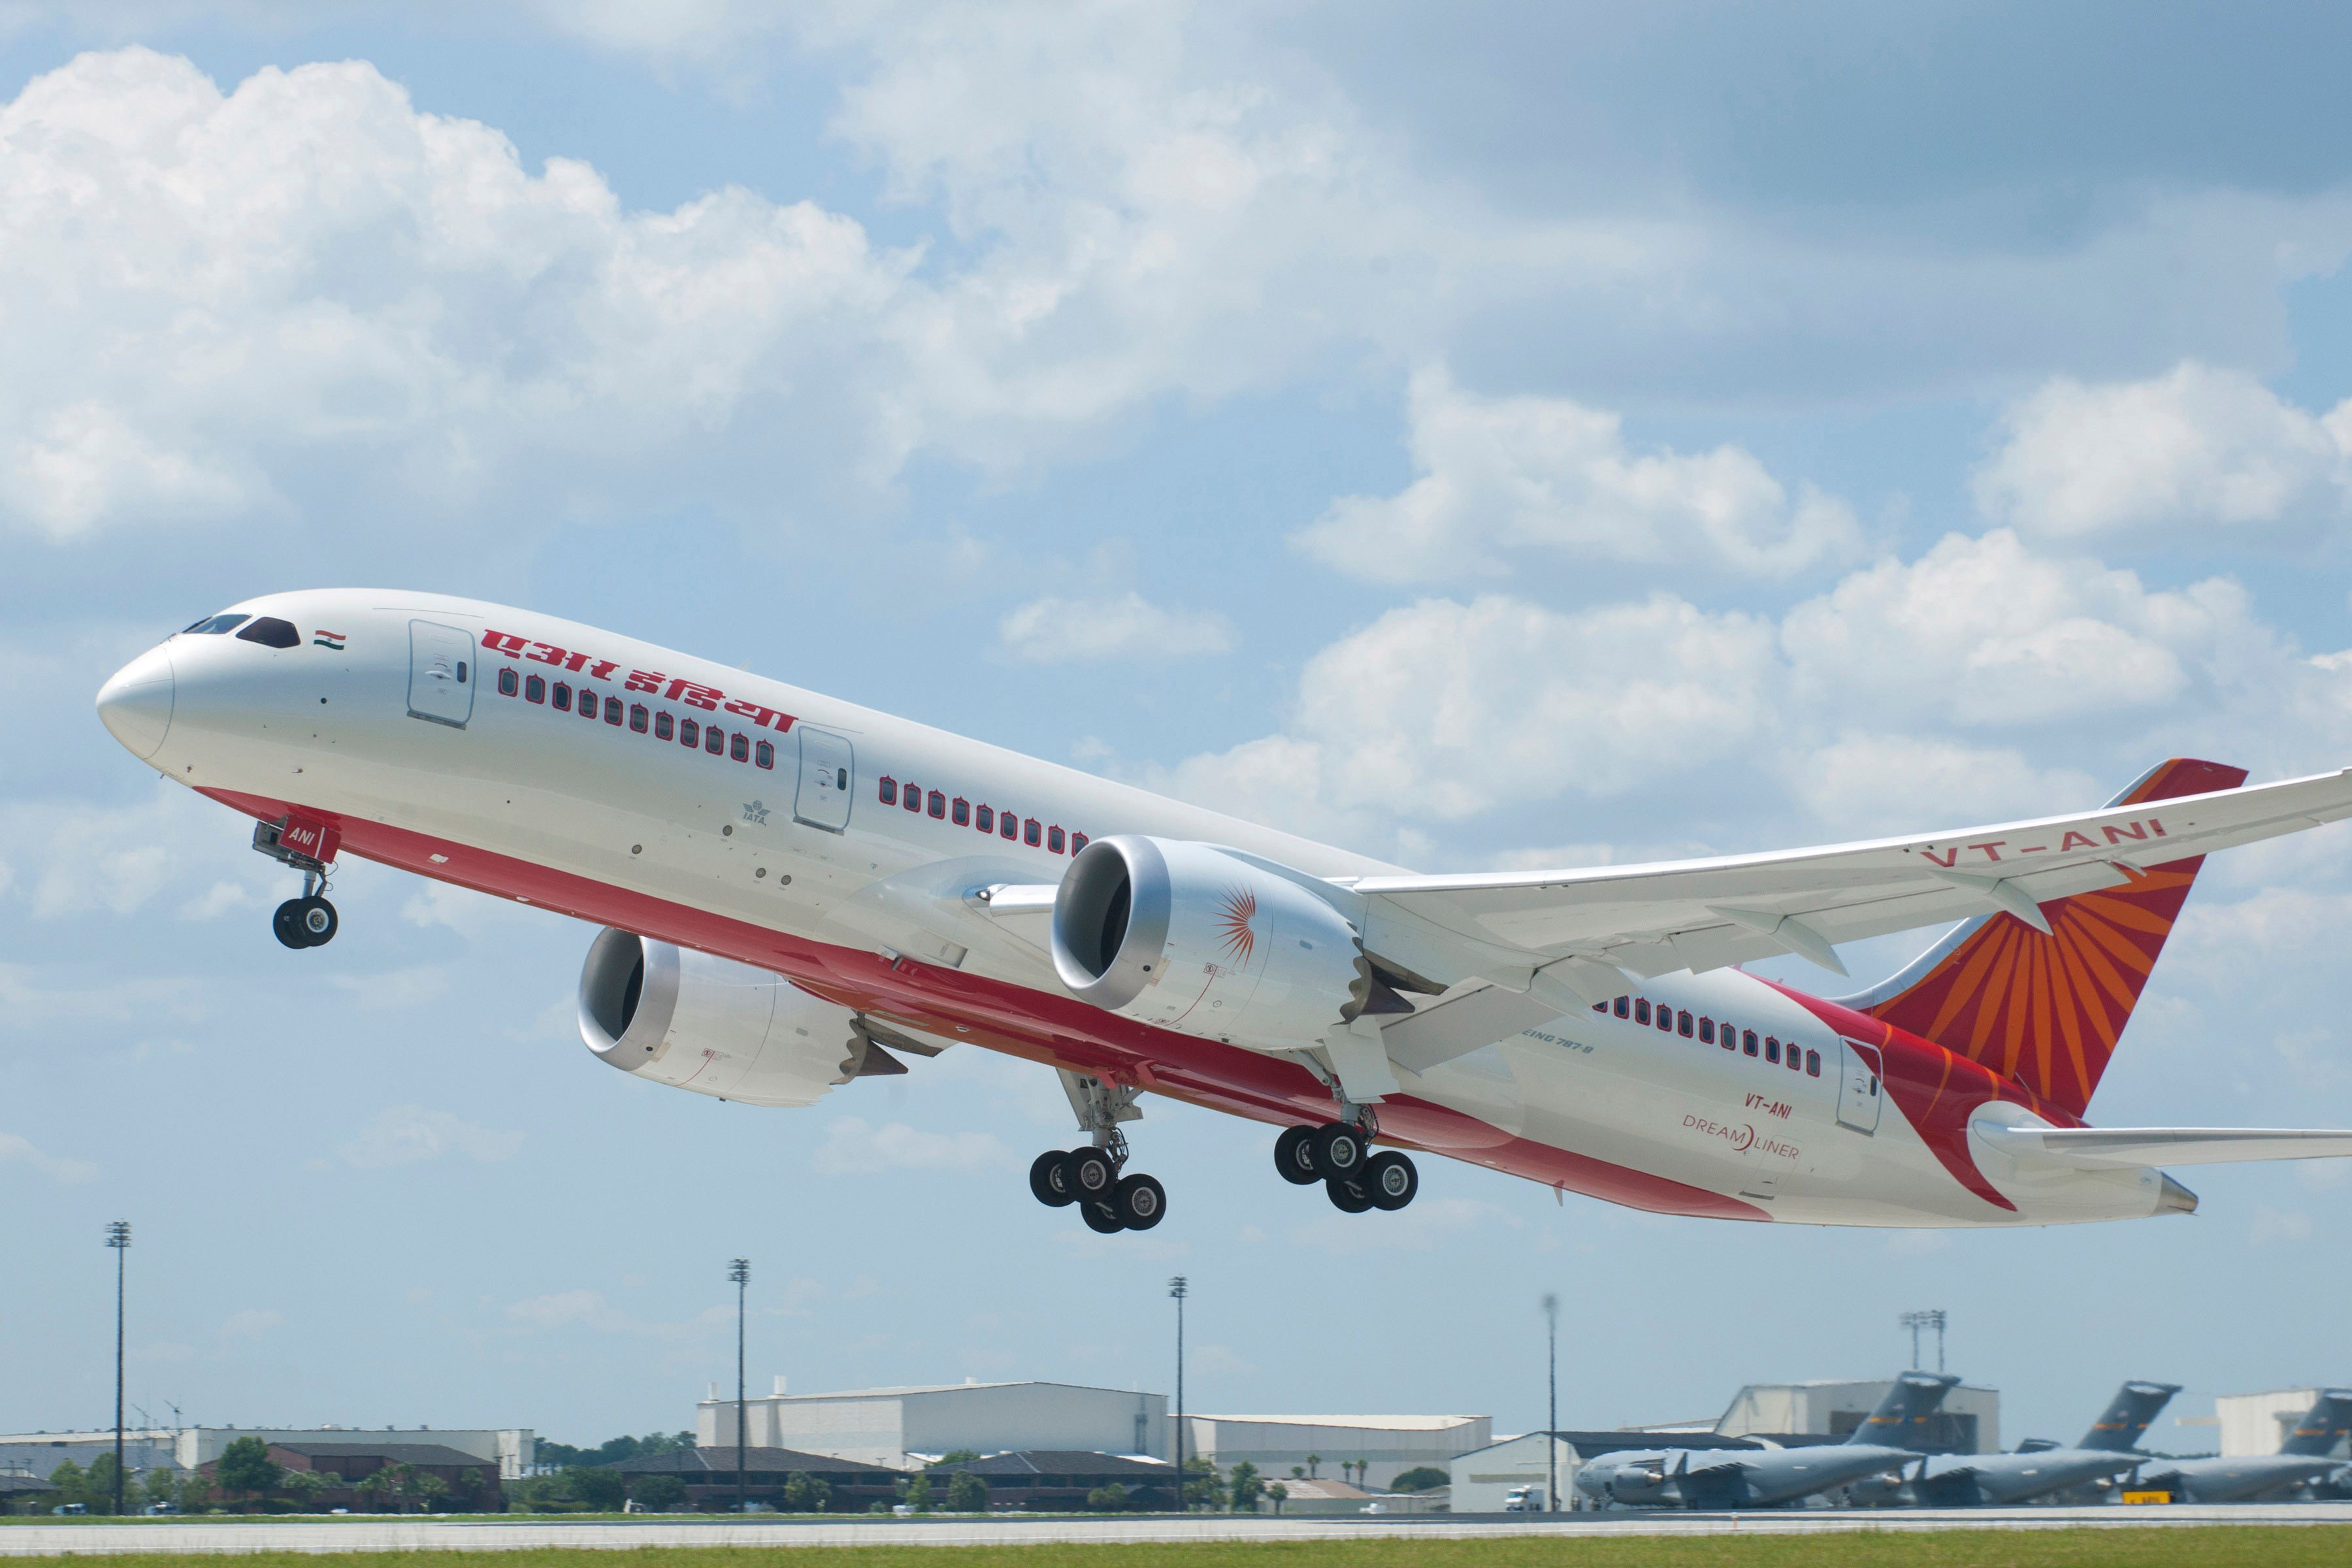 Air India Boeing 787 taking off